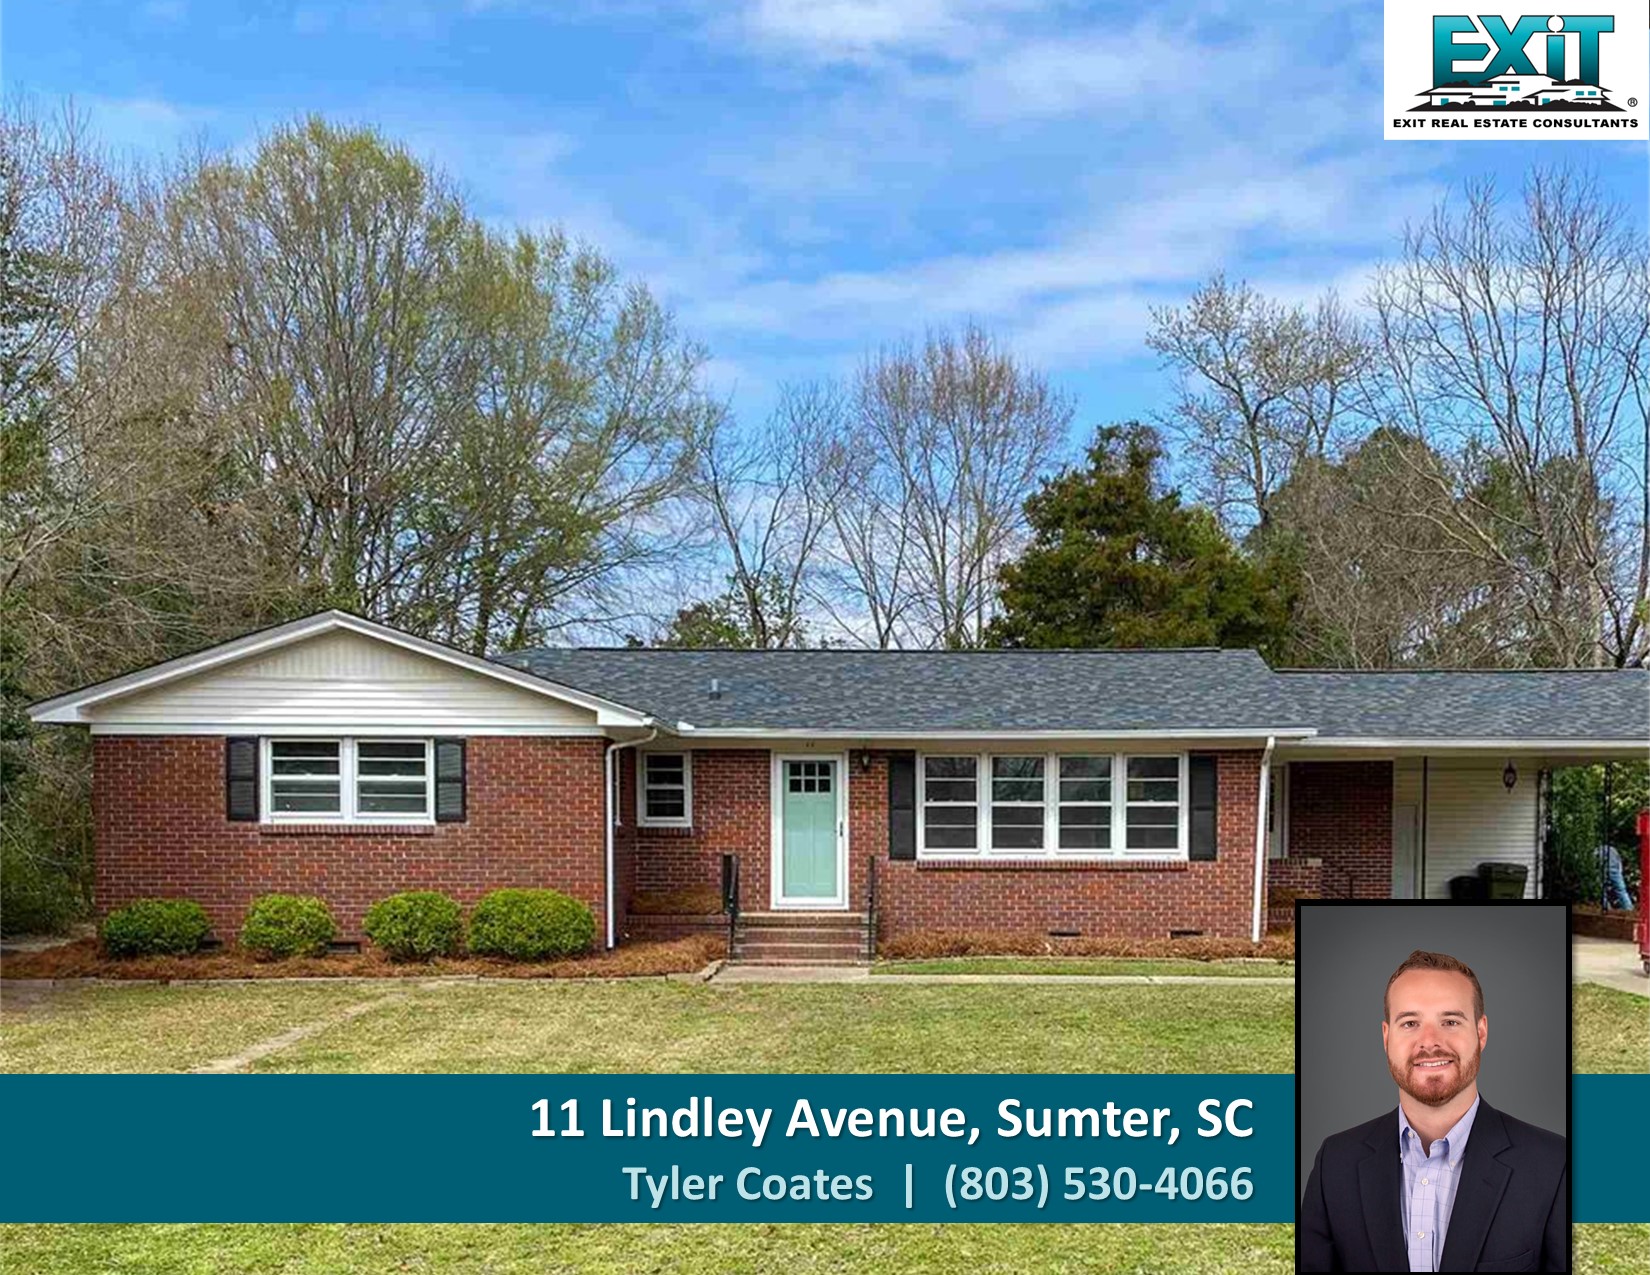 Just listed in Sumter